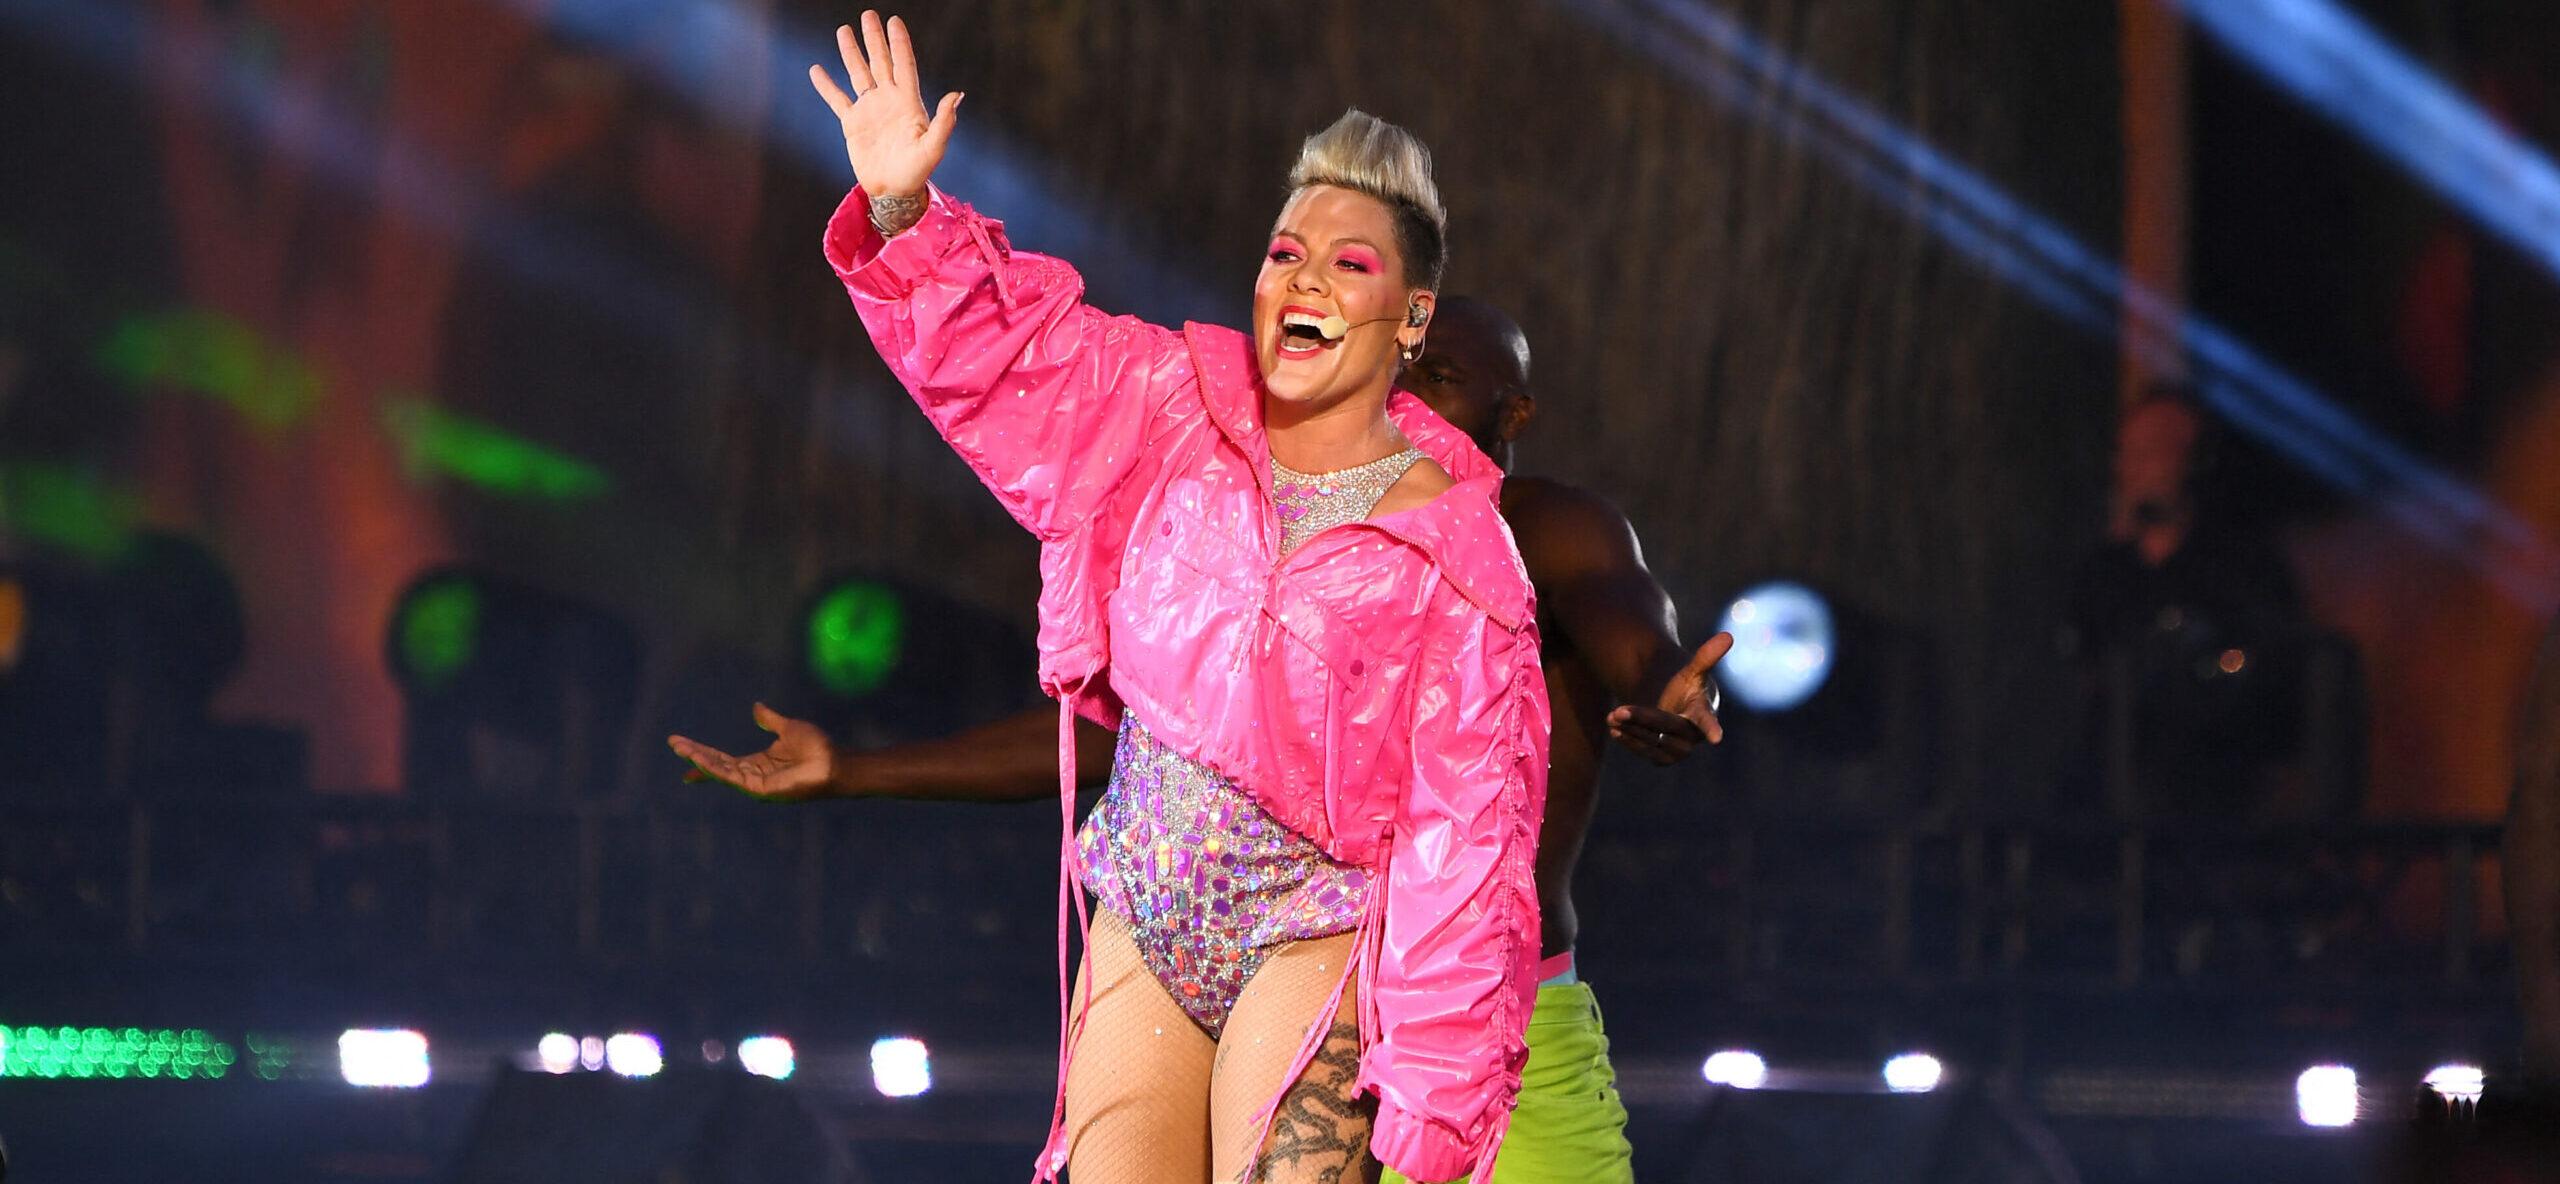 P!nk Teaches Daughter A ‘Good Lesson In Ignorance’ In Response To ‘Hateful’ Internet Troll